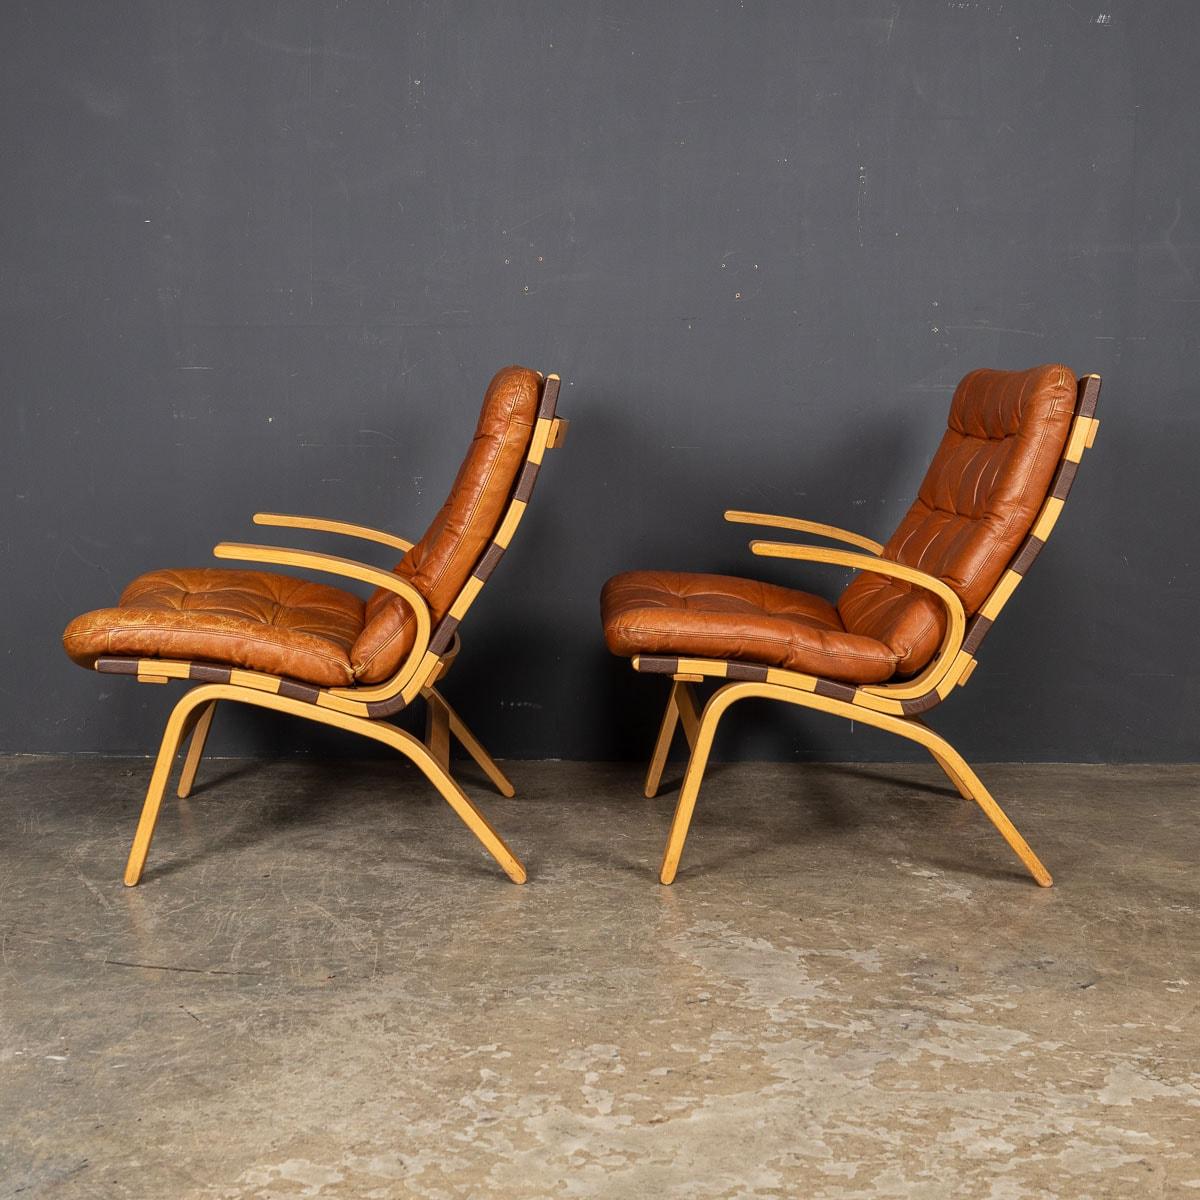 20th Century Danish Curved Beech Tan Leather Chairs By Farstrup Møbler, c.1970 2